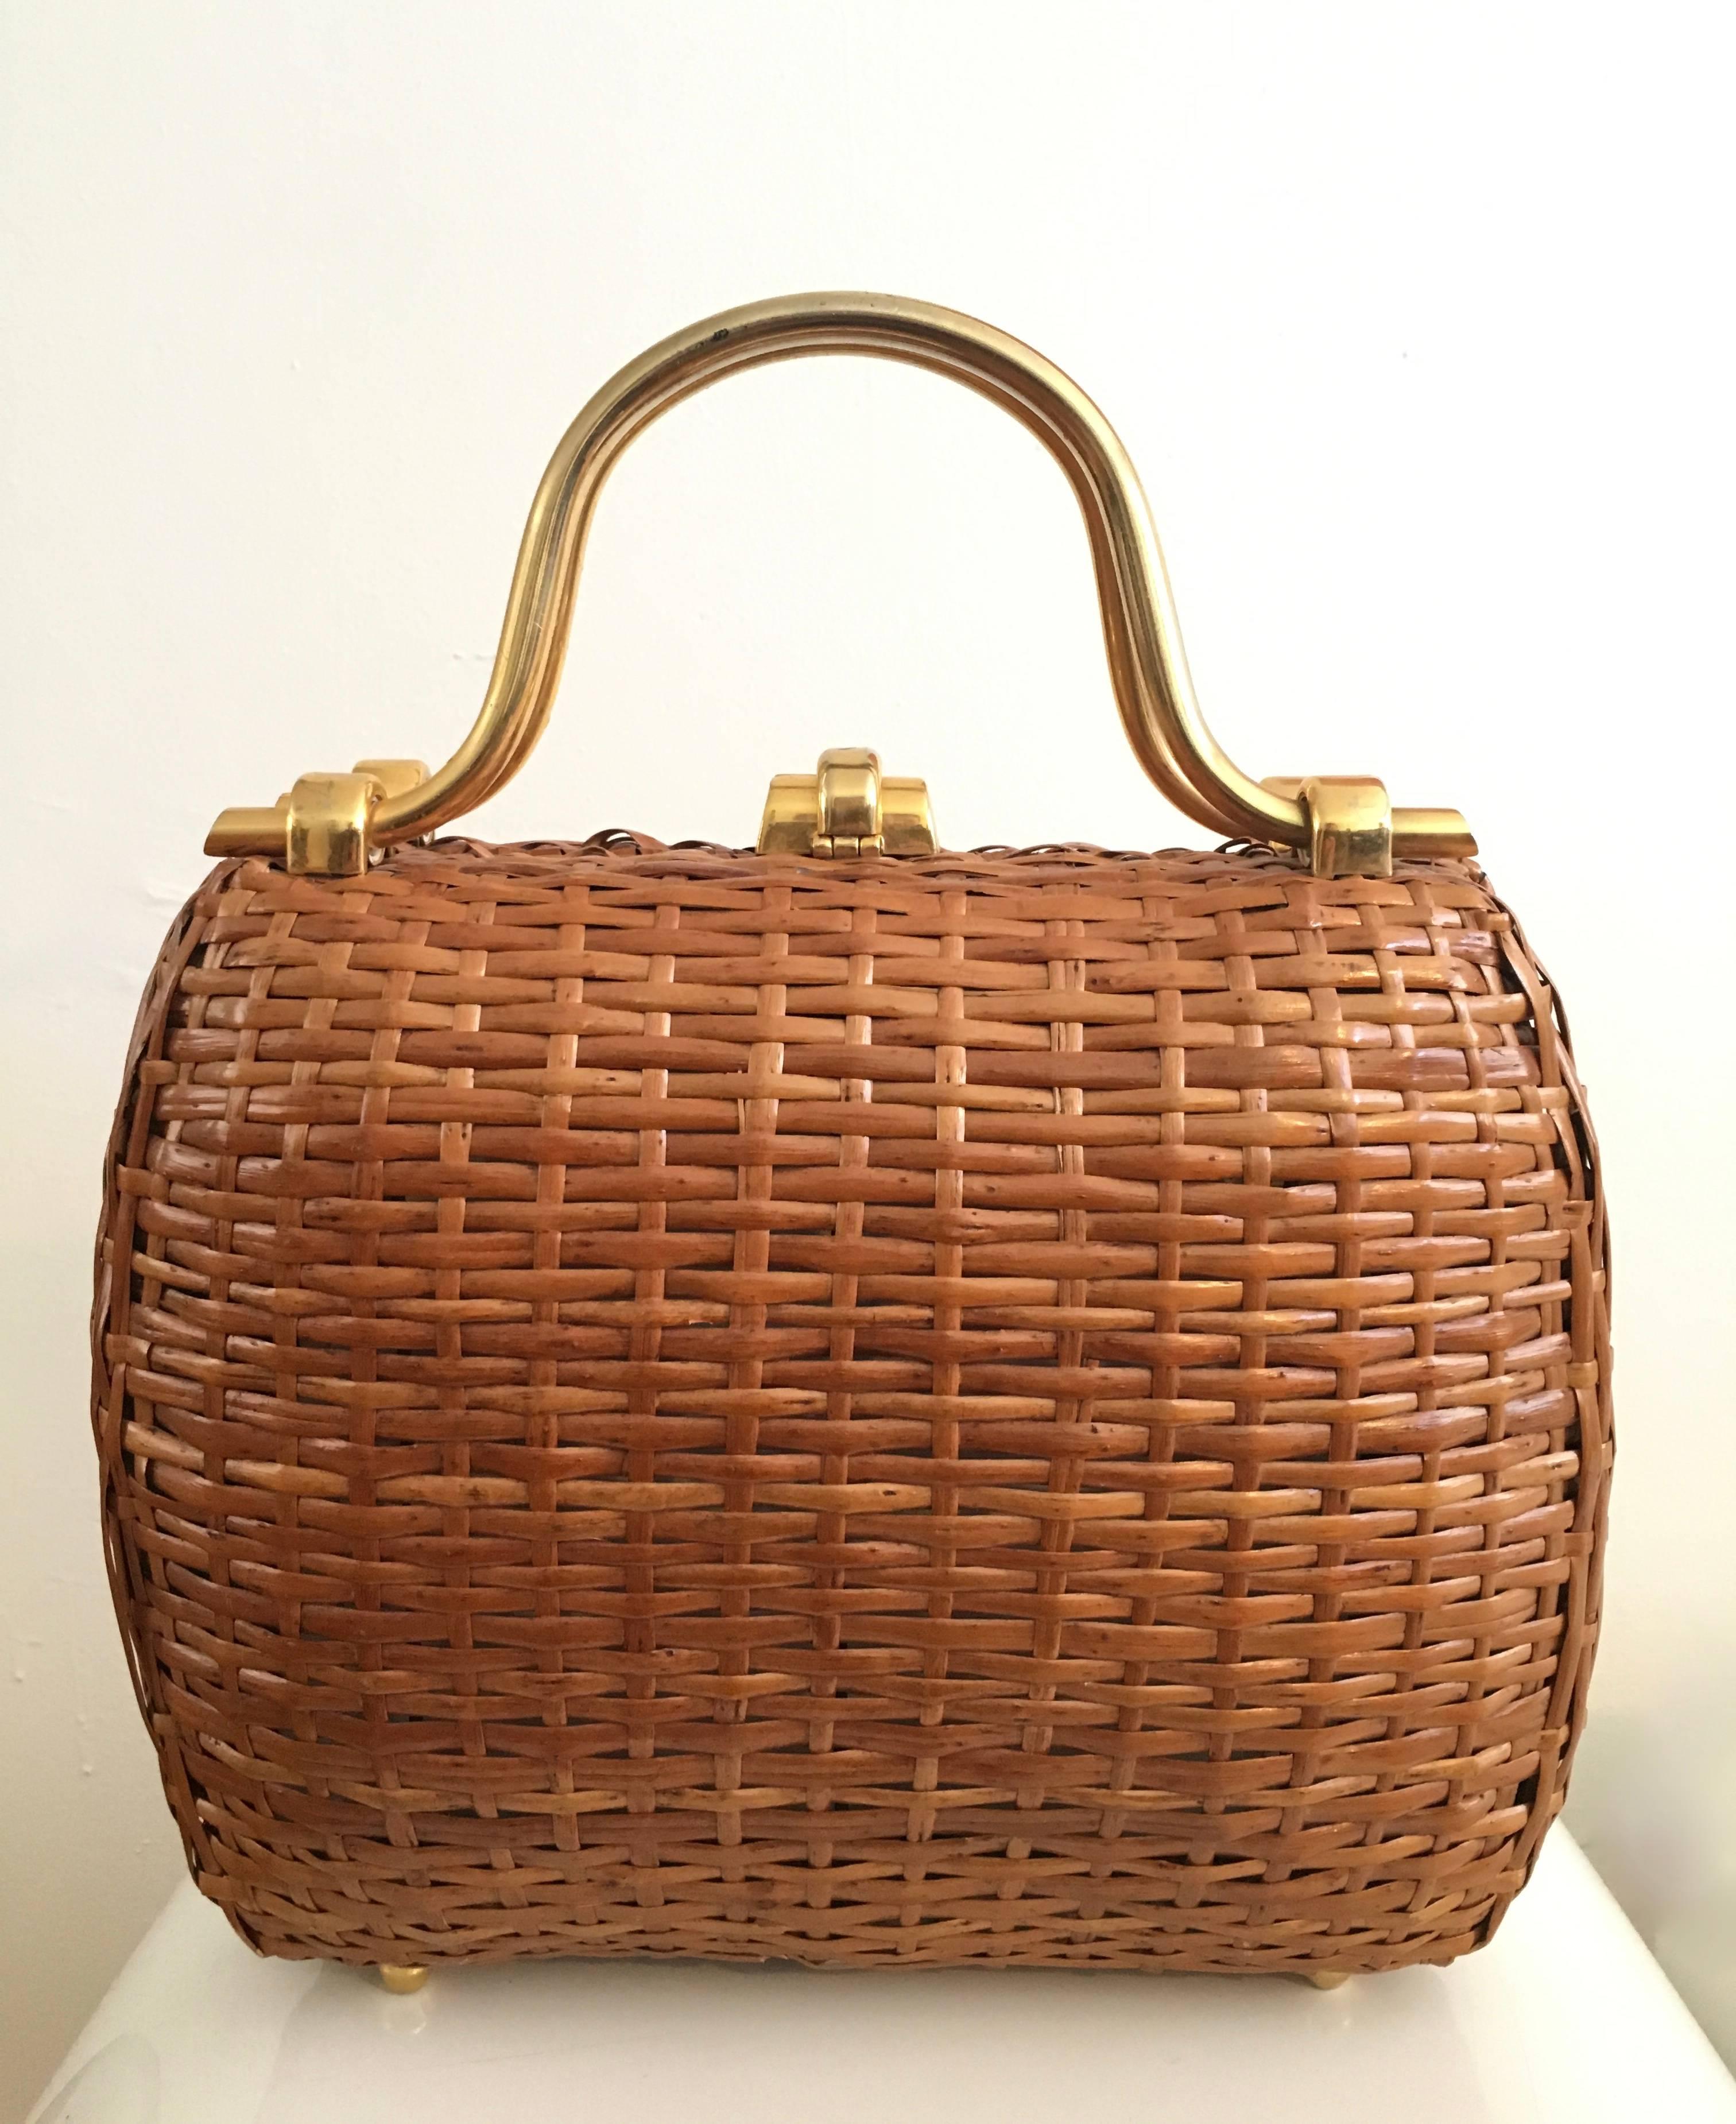 Koret 1950s woven wicker / reed basket handbag with brass handles and clasp made in Italy.
Gorgeous mid century design that is just as stylish today as the day it was conceived. This handbag is in very good vintage condition for a senior citizen,